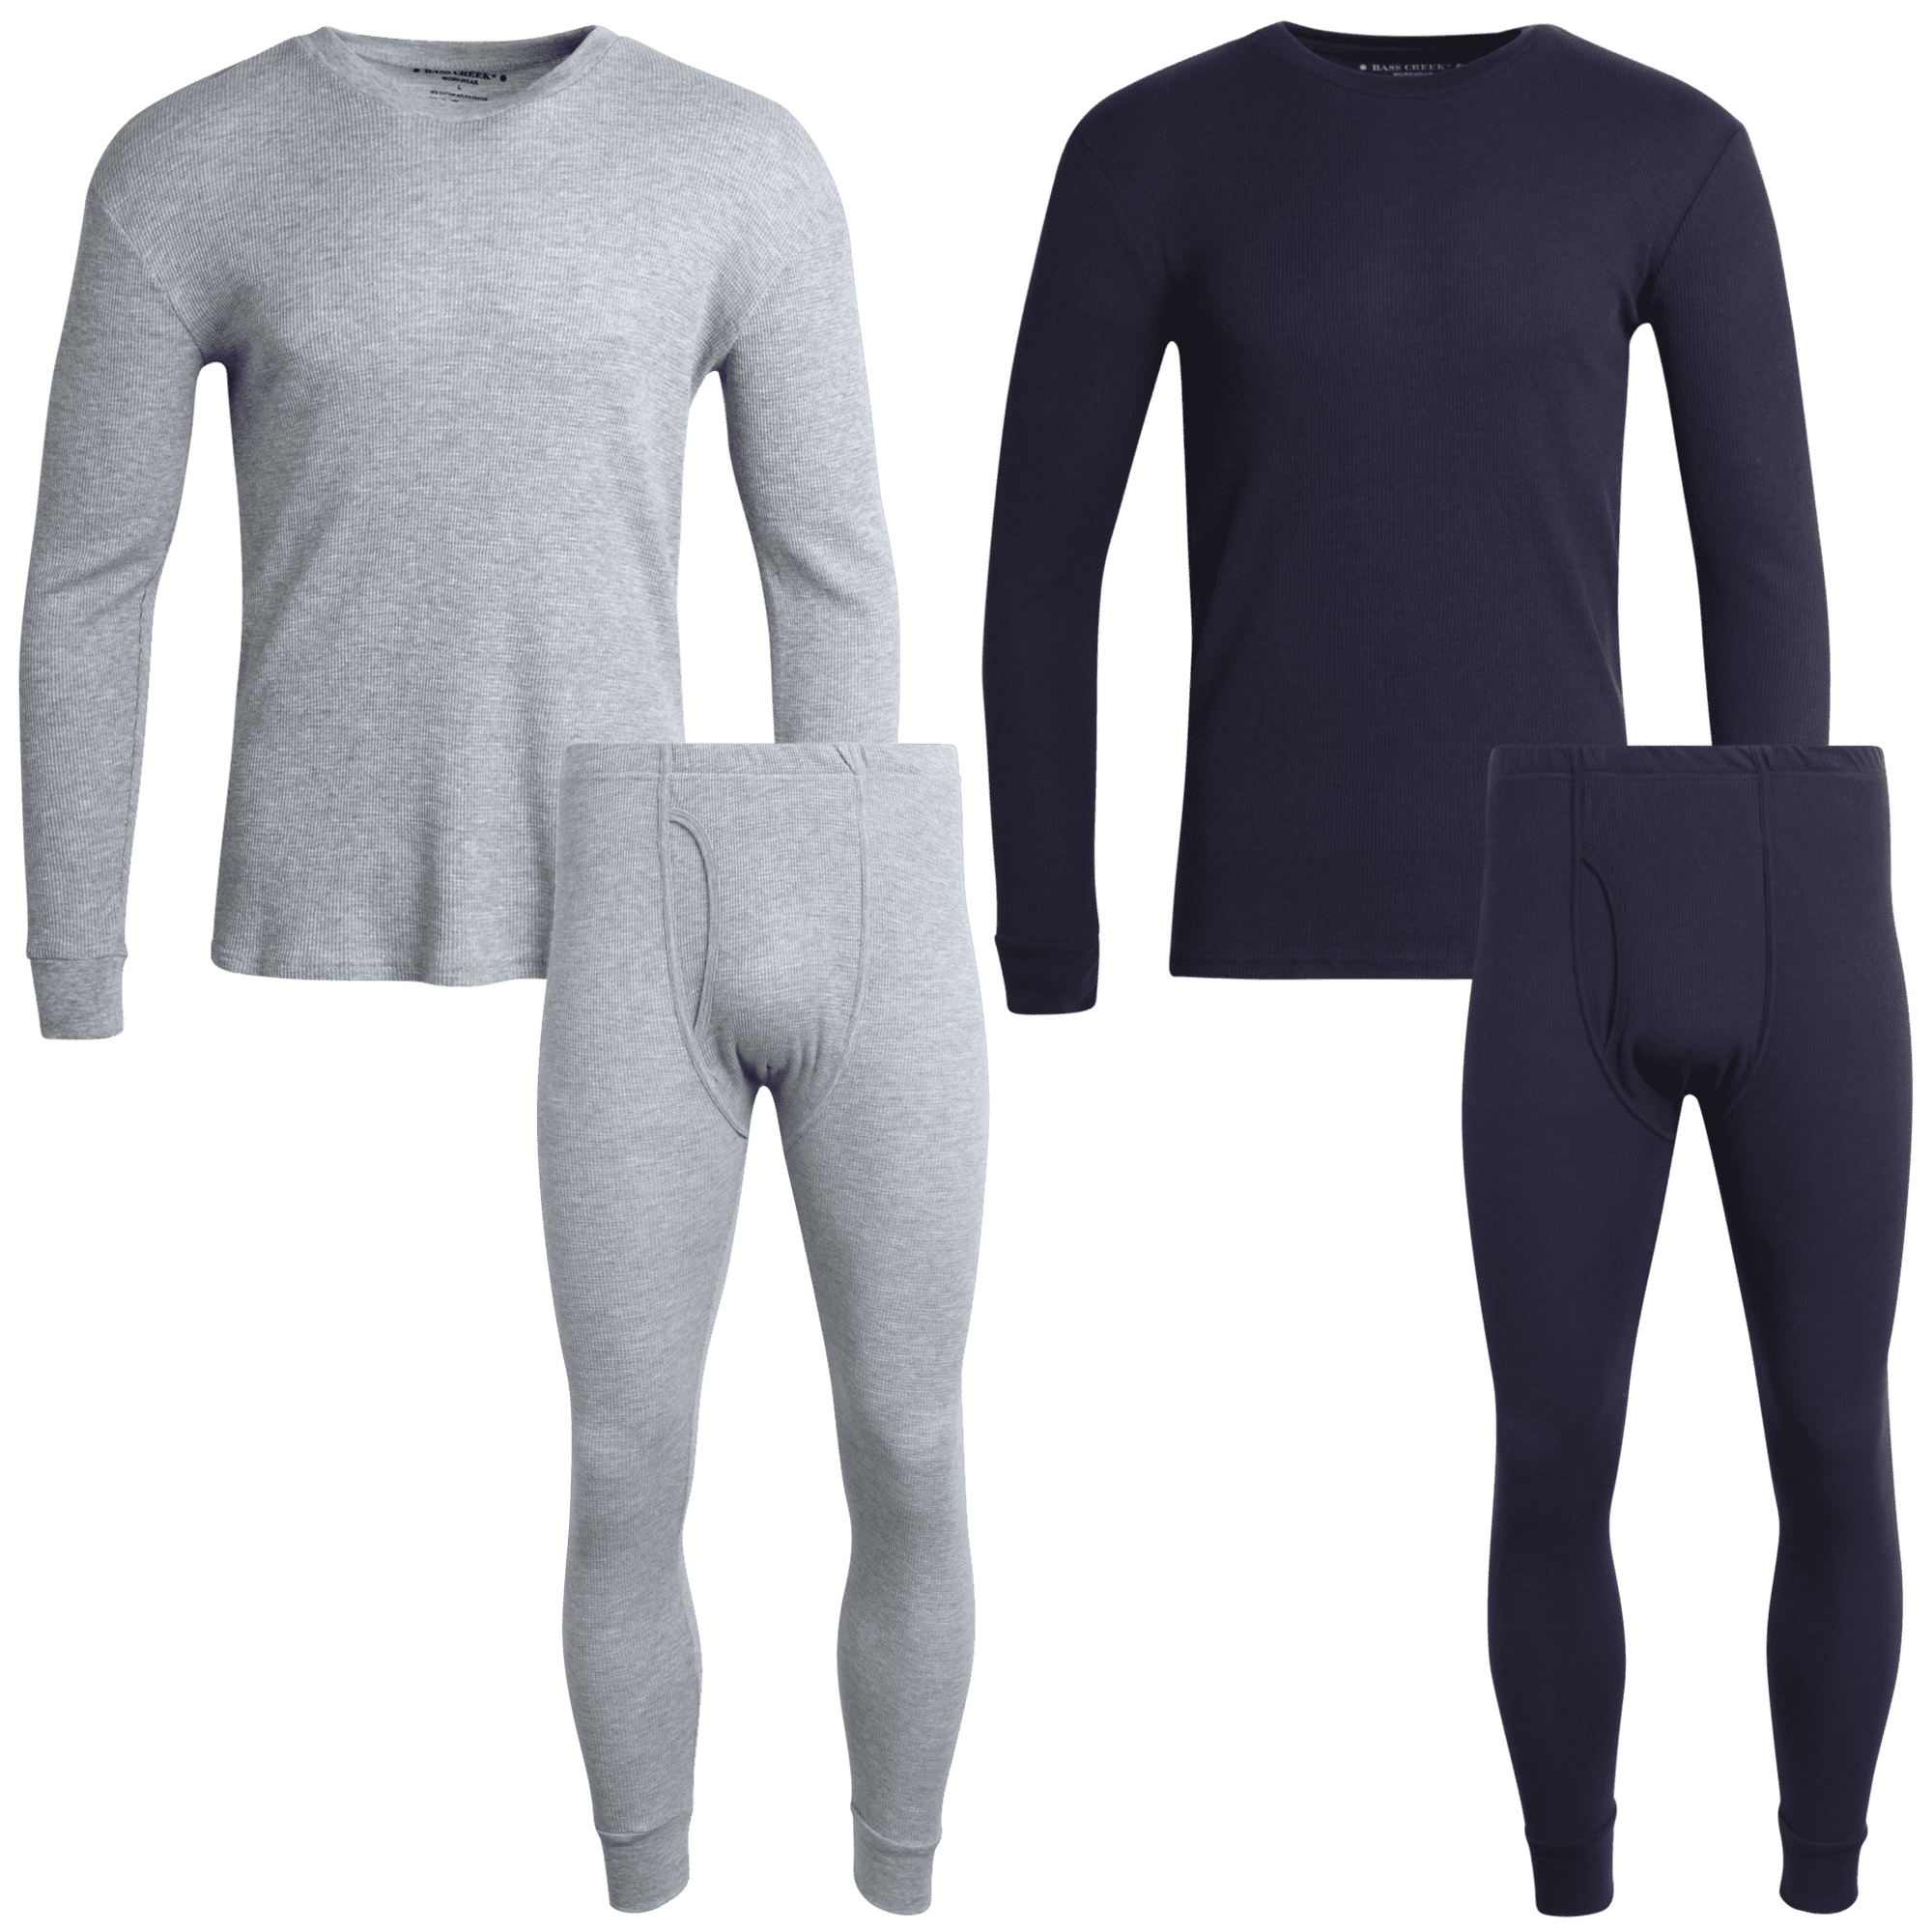 Bass Creek Outfitters Men's Thermal Underwear Set - 4 Piece Waffle